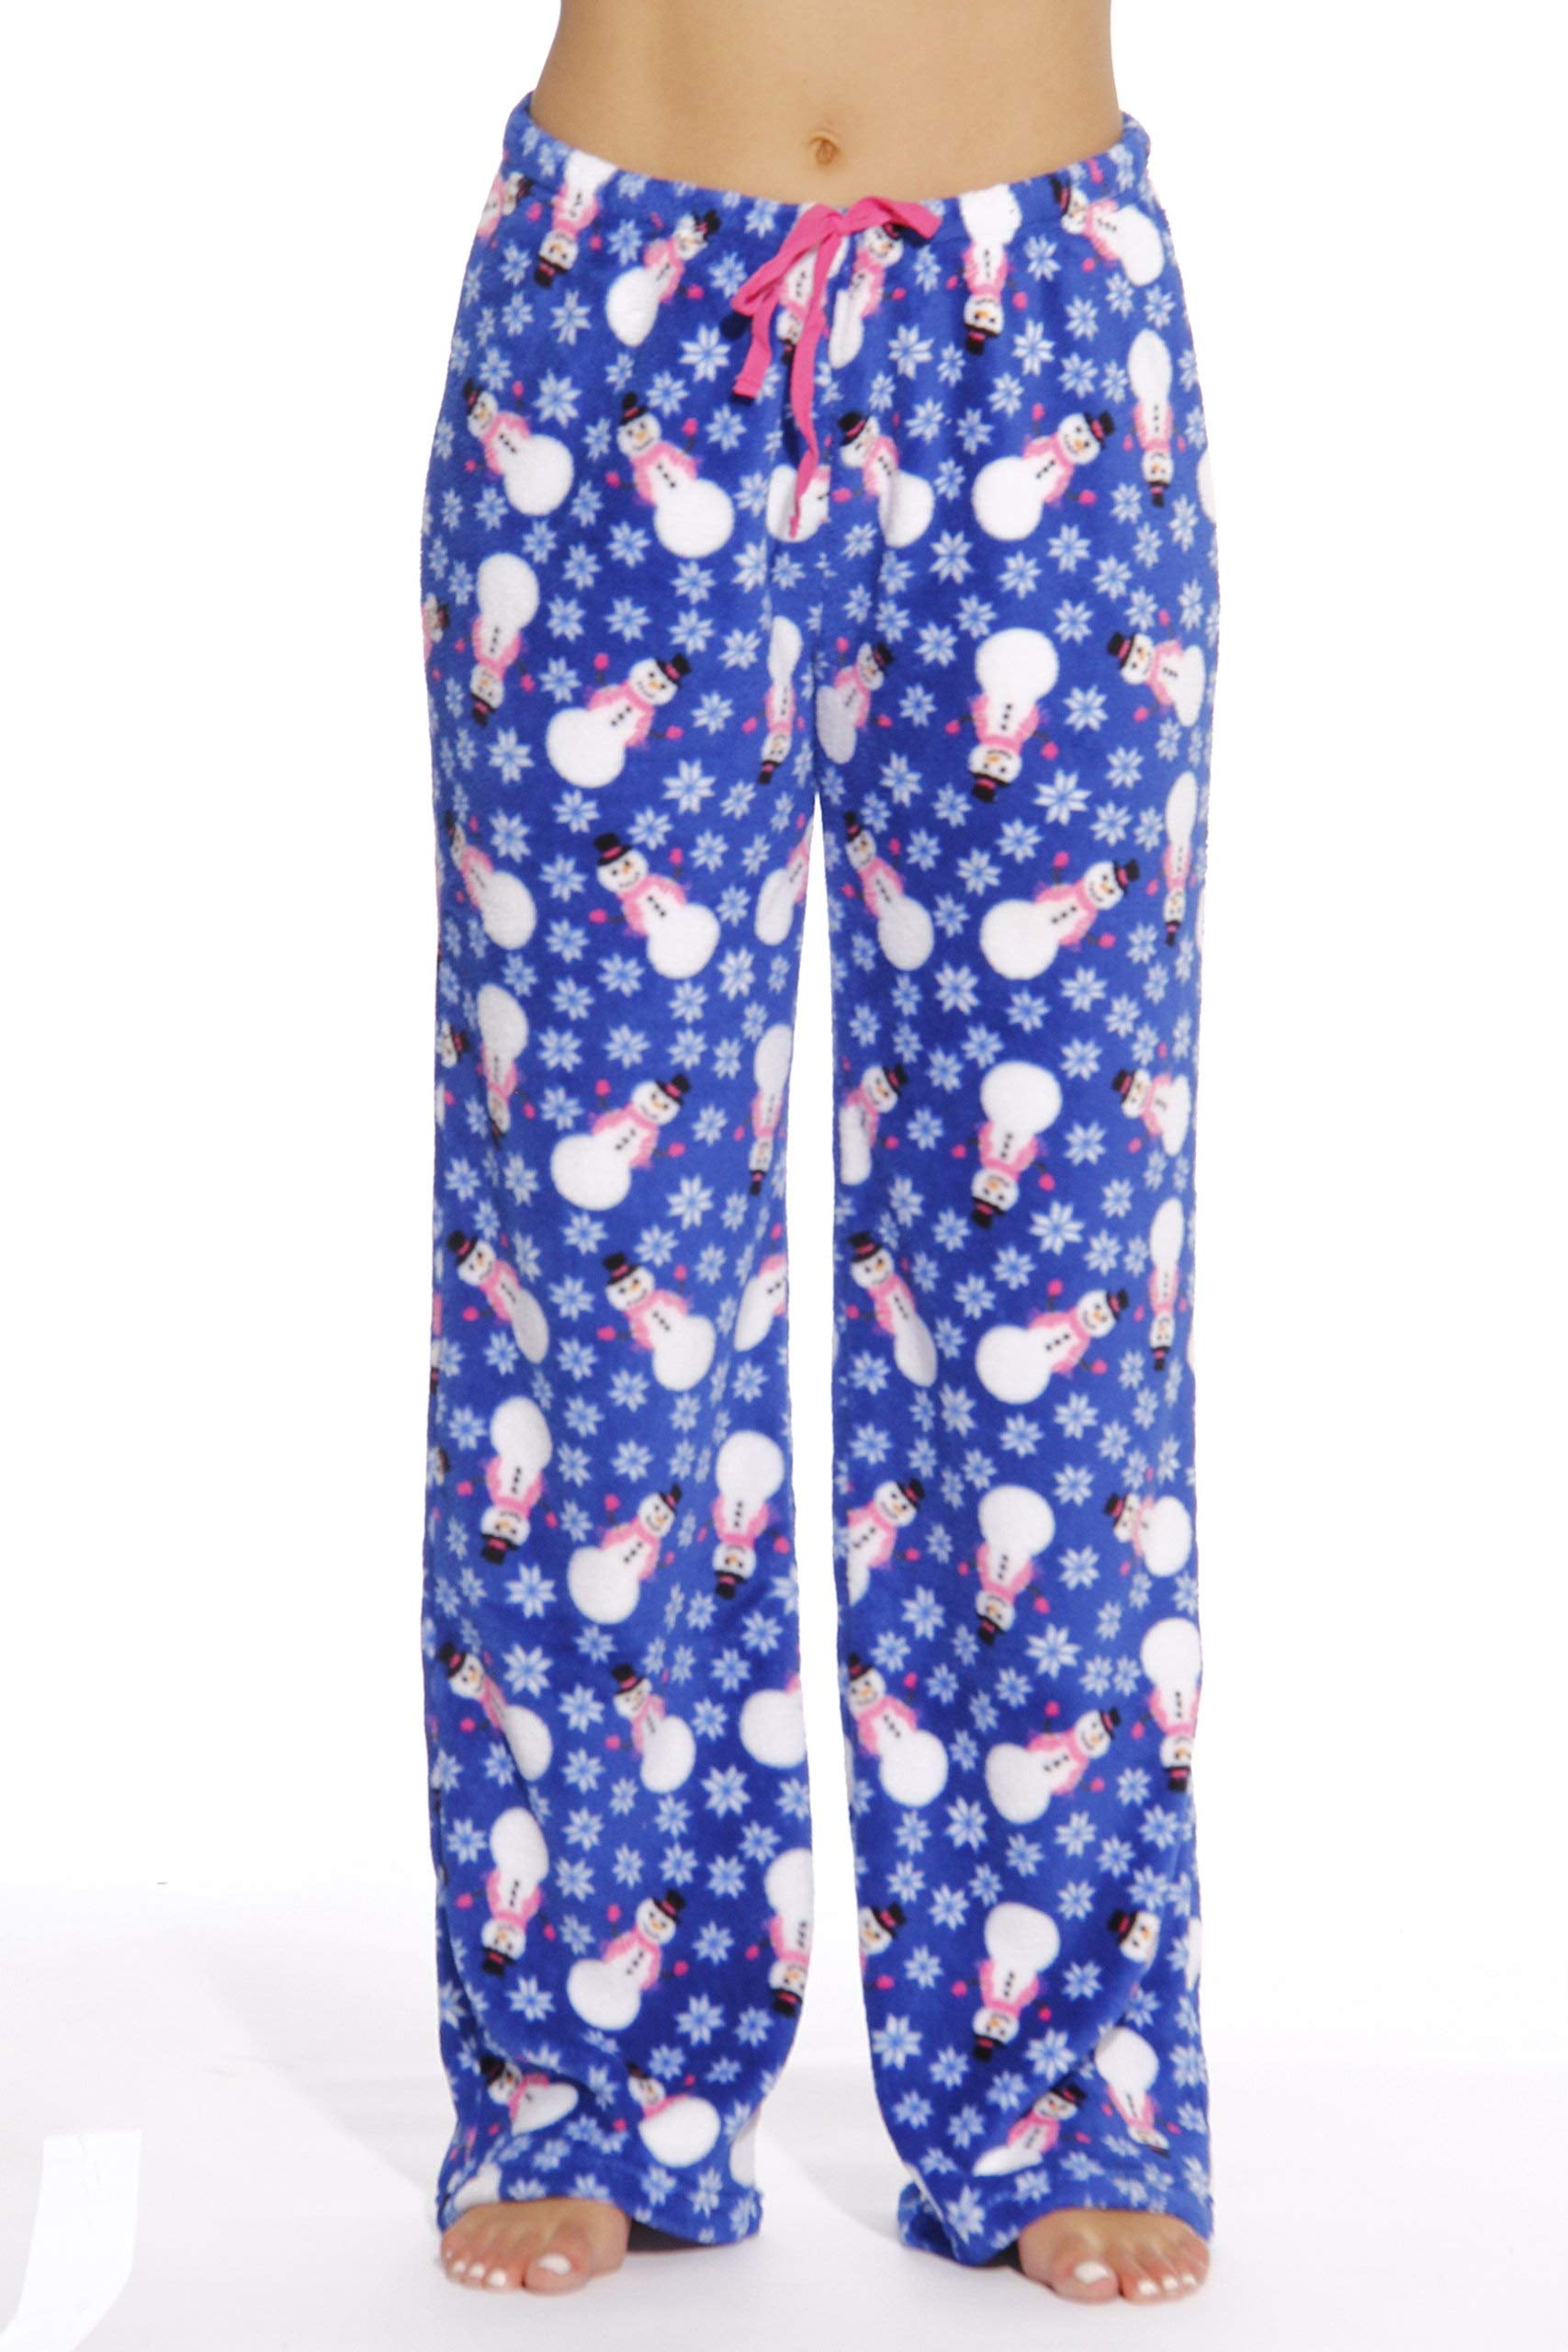 Turquoise Ducks Pajama Pants - Made with Love and Kisses